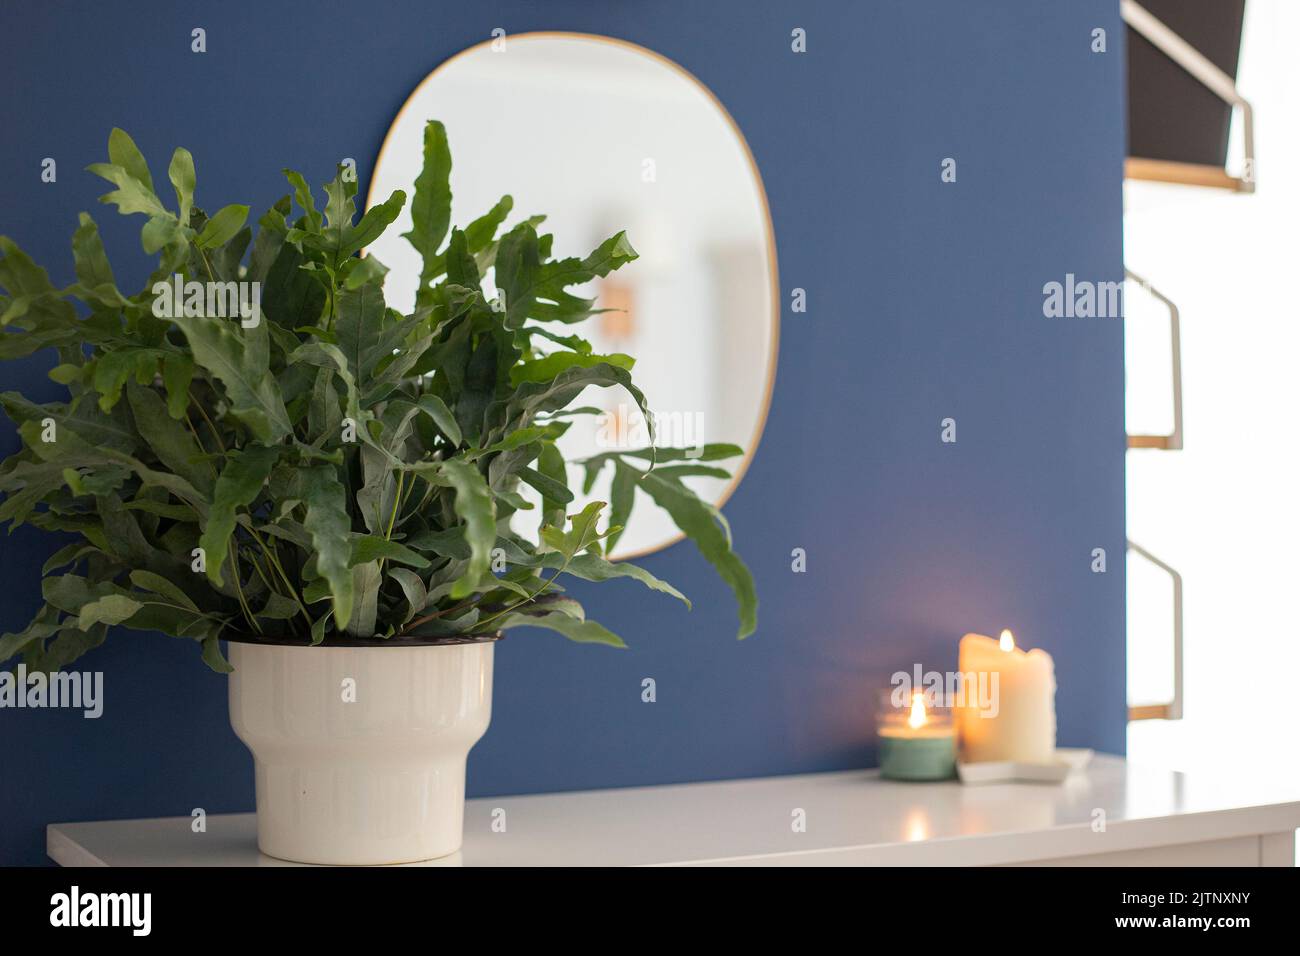 A plant of Blue Star fern (Phlebodium aureum), a fancy houseplant, over a white cabinet with blue walls, a mirror and candles. Stock Photo